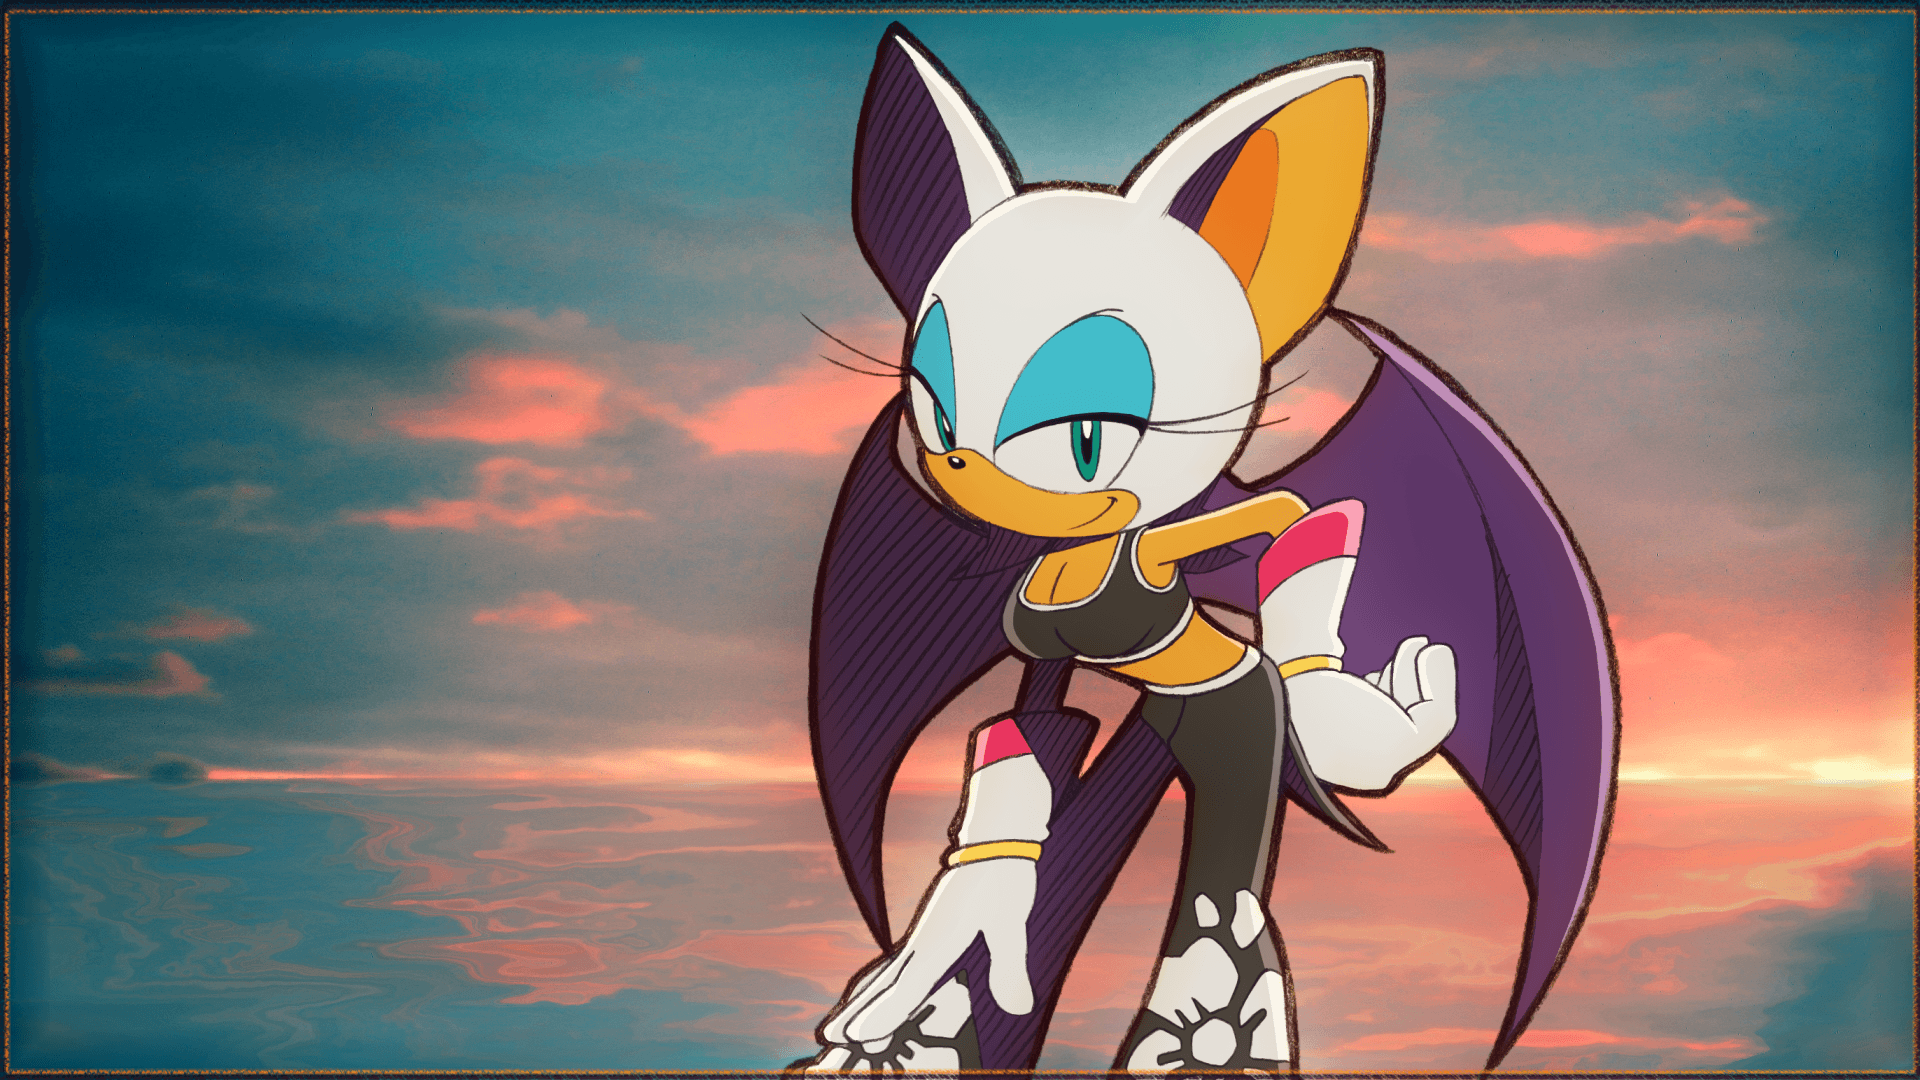 Rouge the Bat 12 by Light.